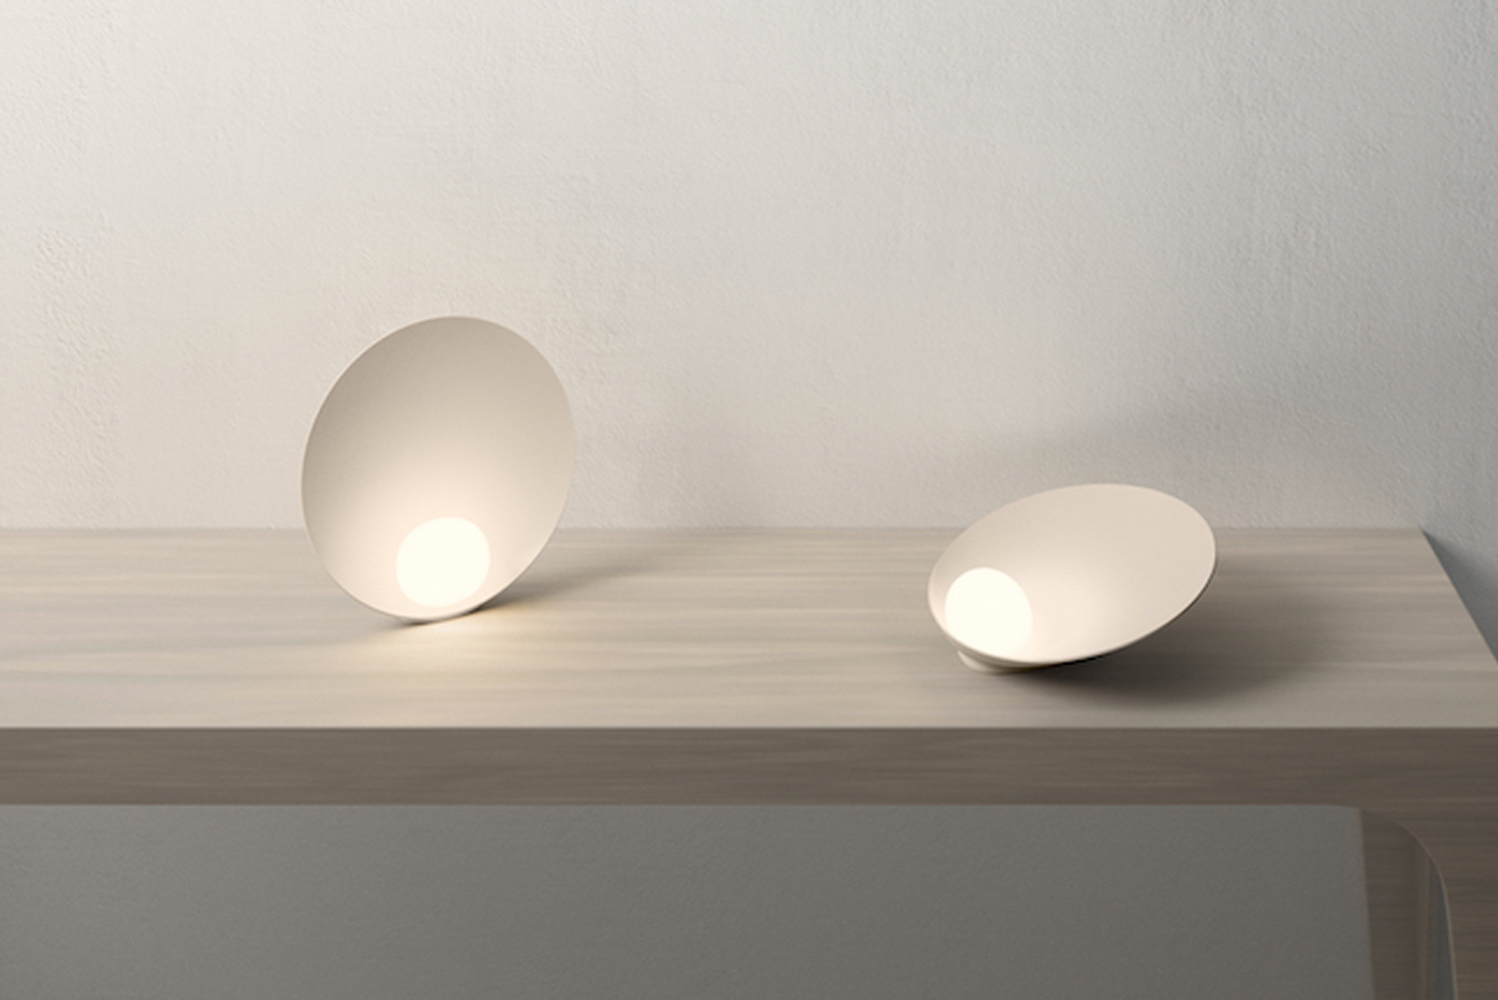 Introducing Musa the latest lighting collection offered by Vibia and designed by Note Design Studio 